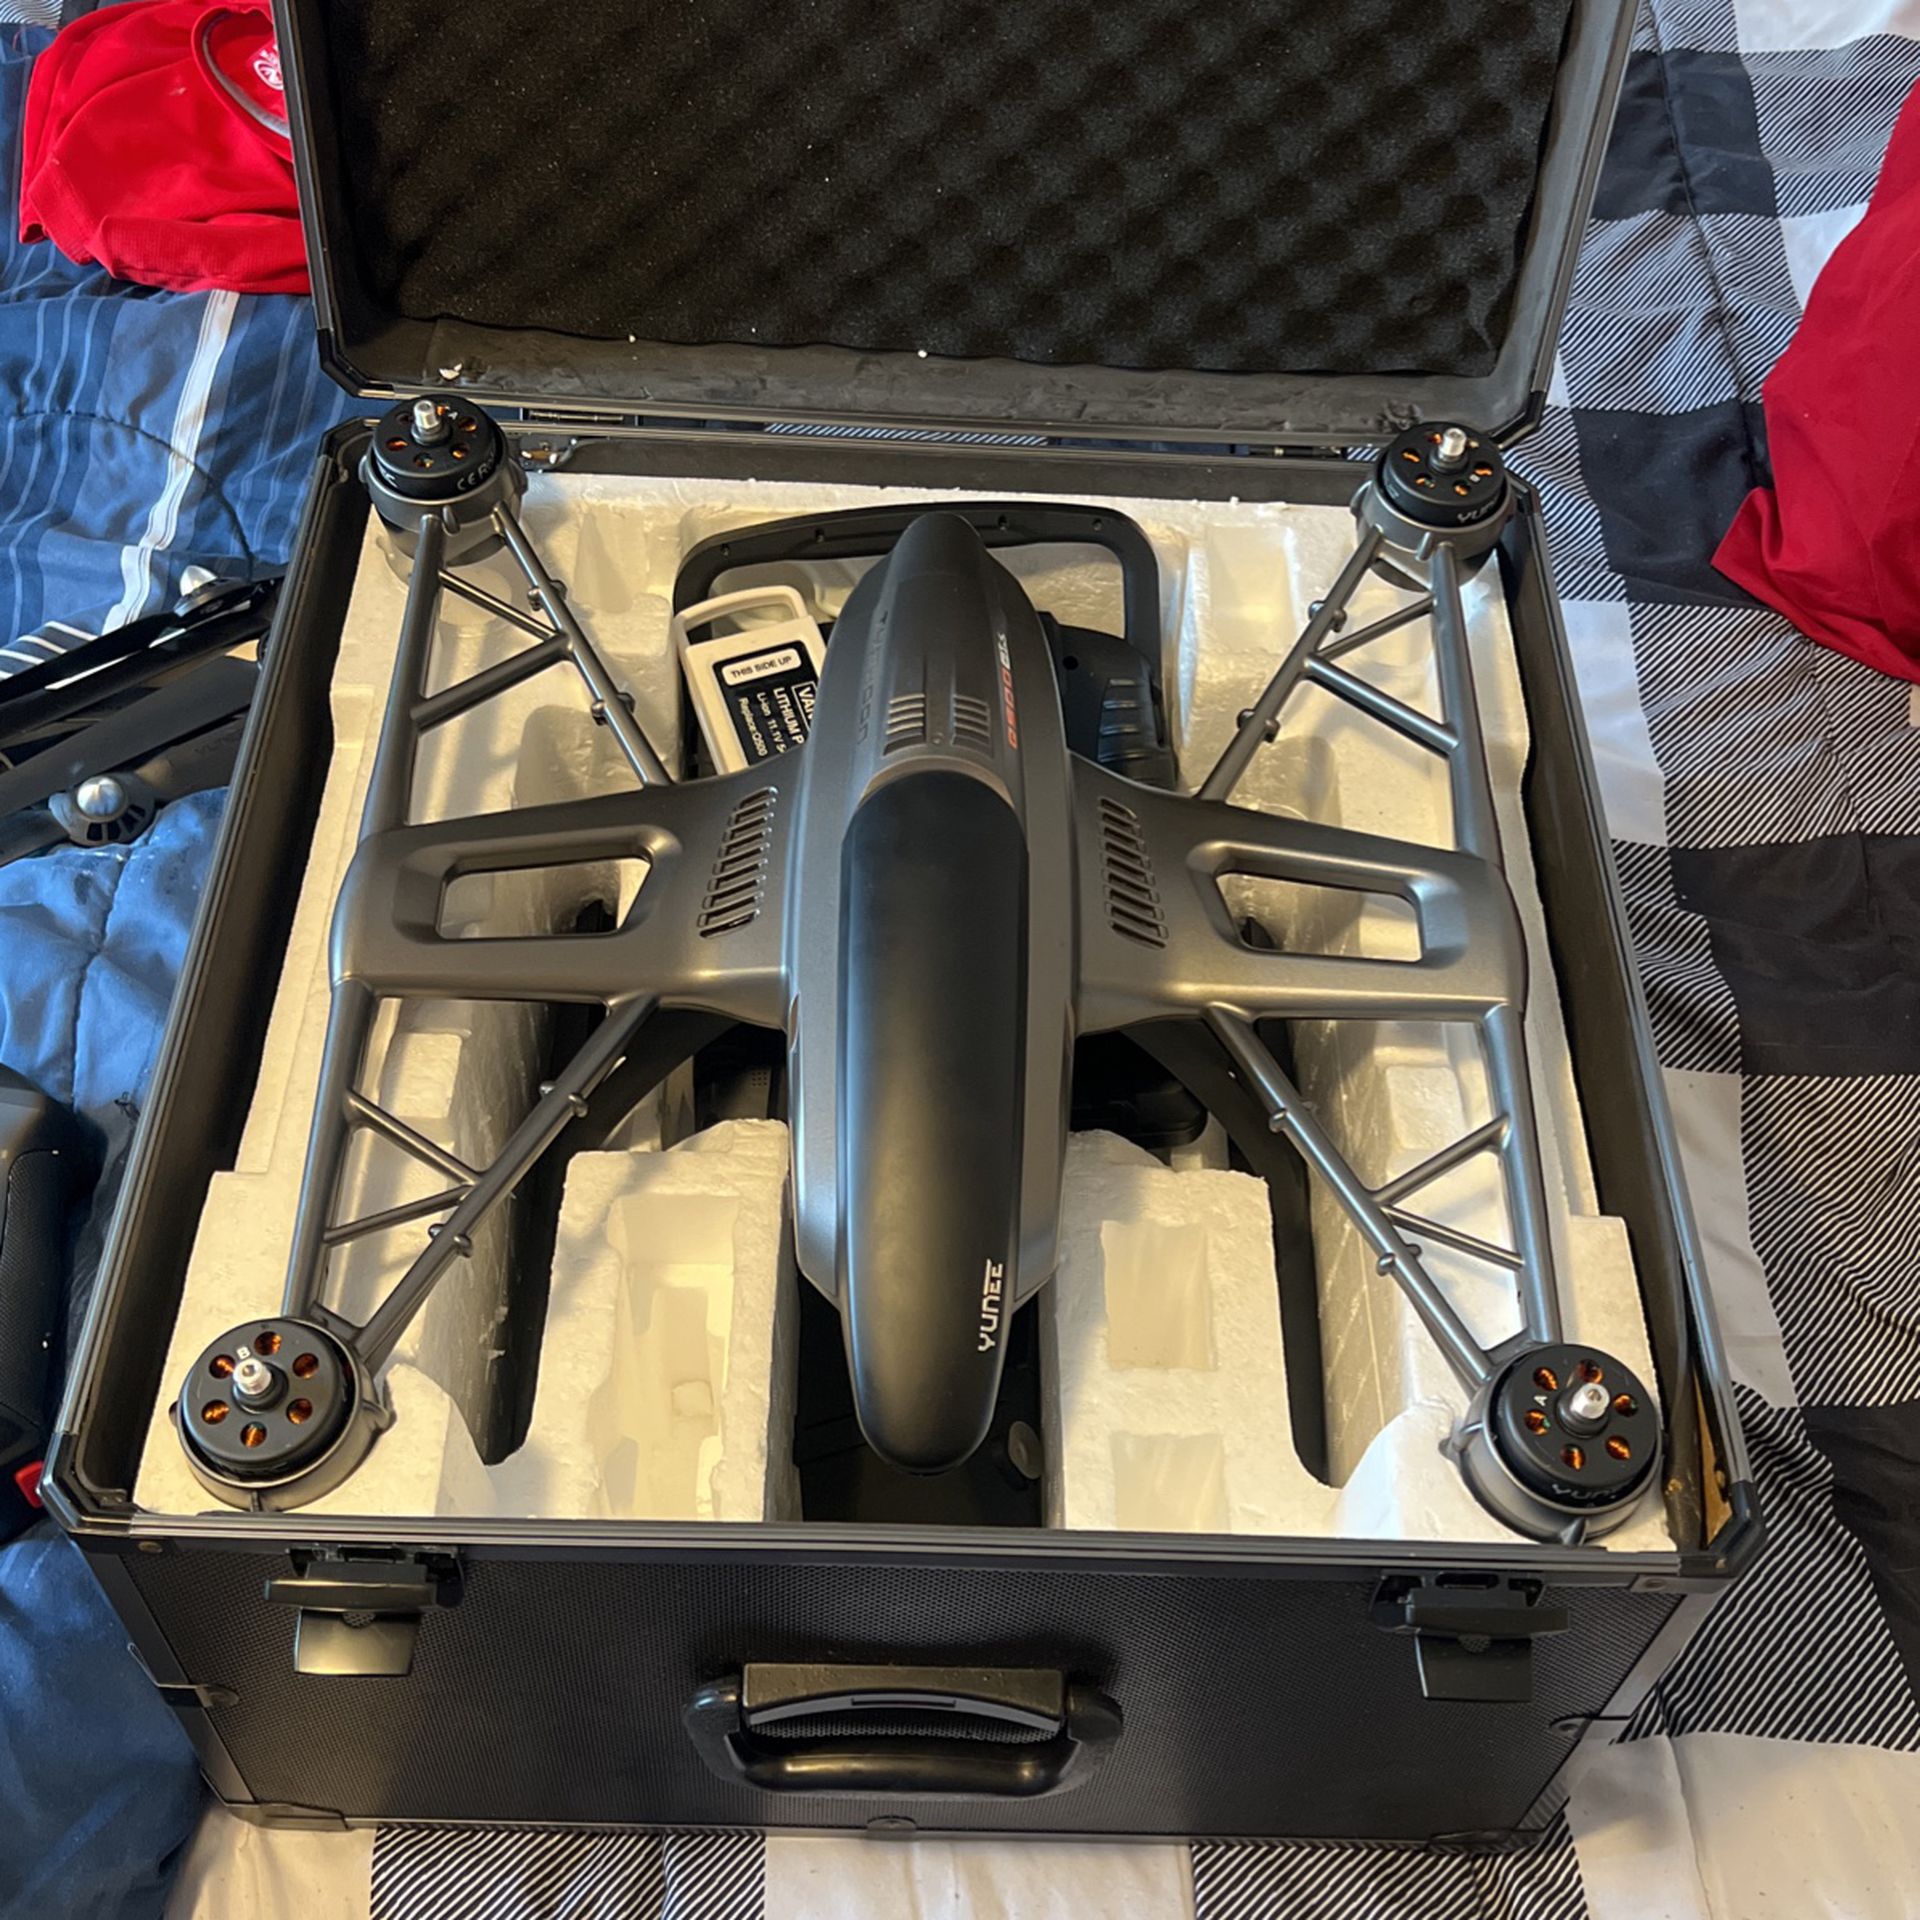 Yunee Typhoon Q500 Drone With 4k Humble Camera 